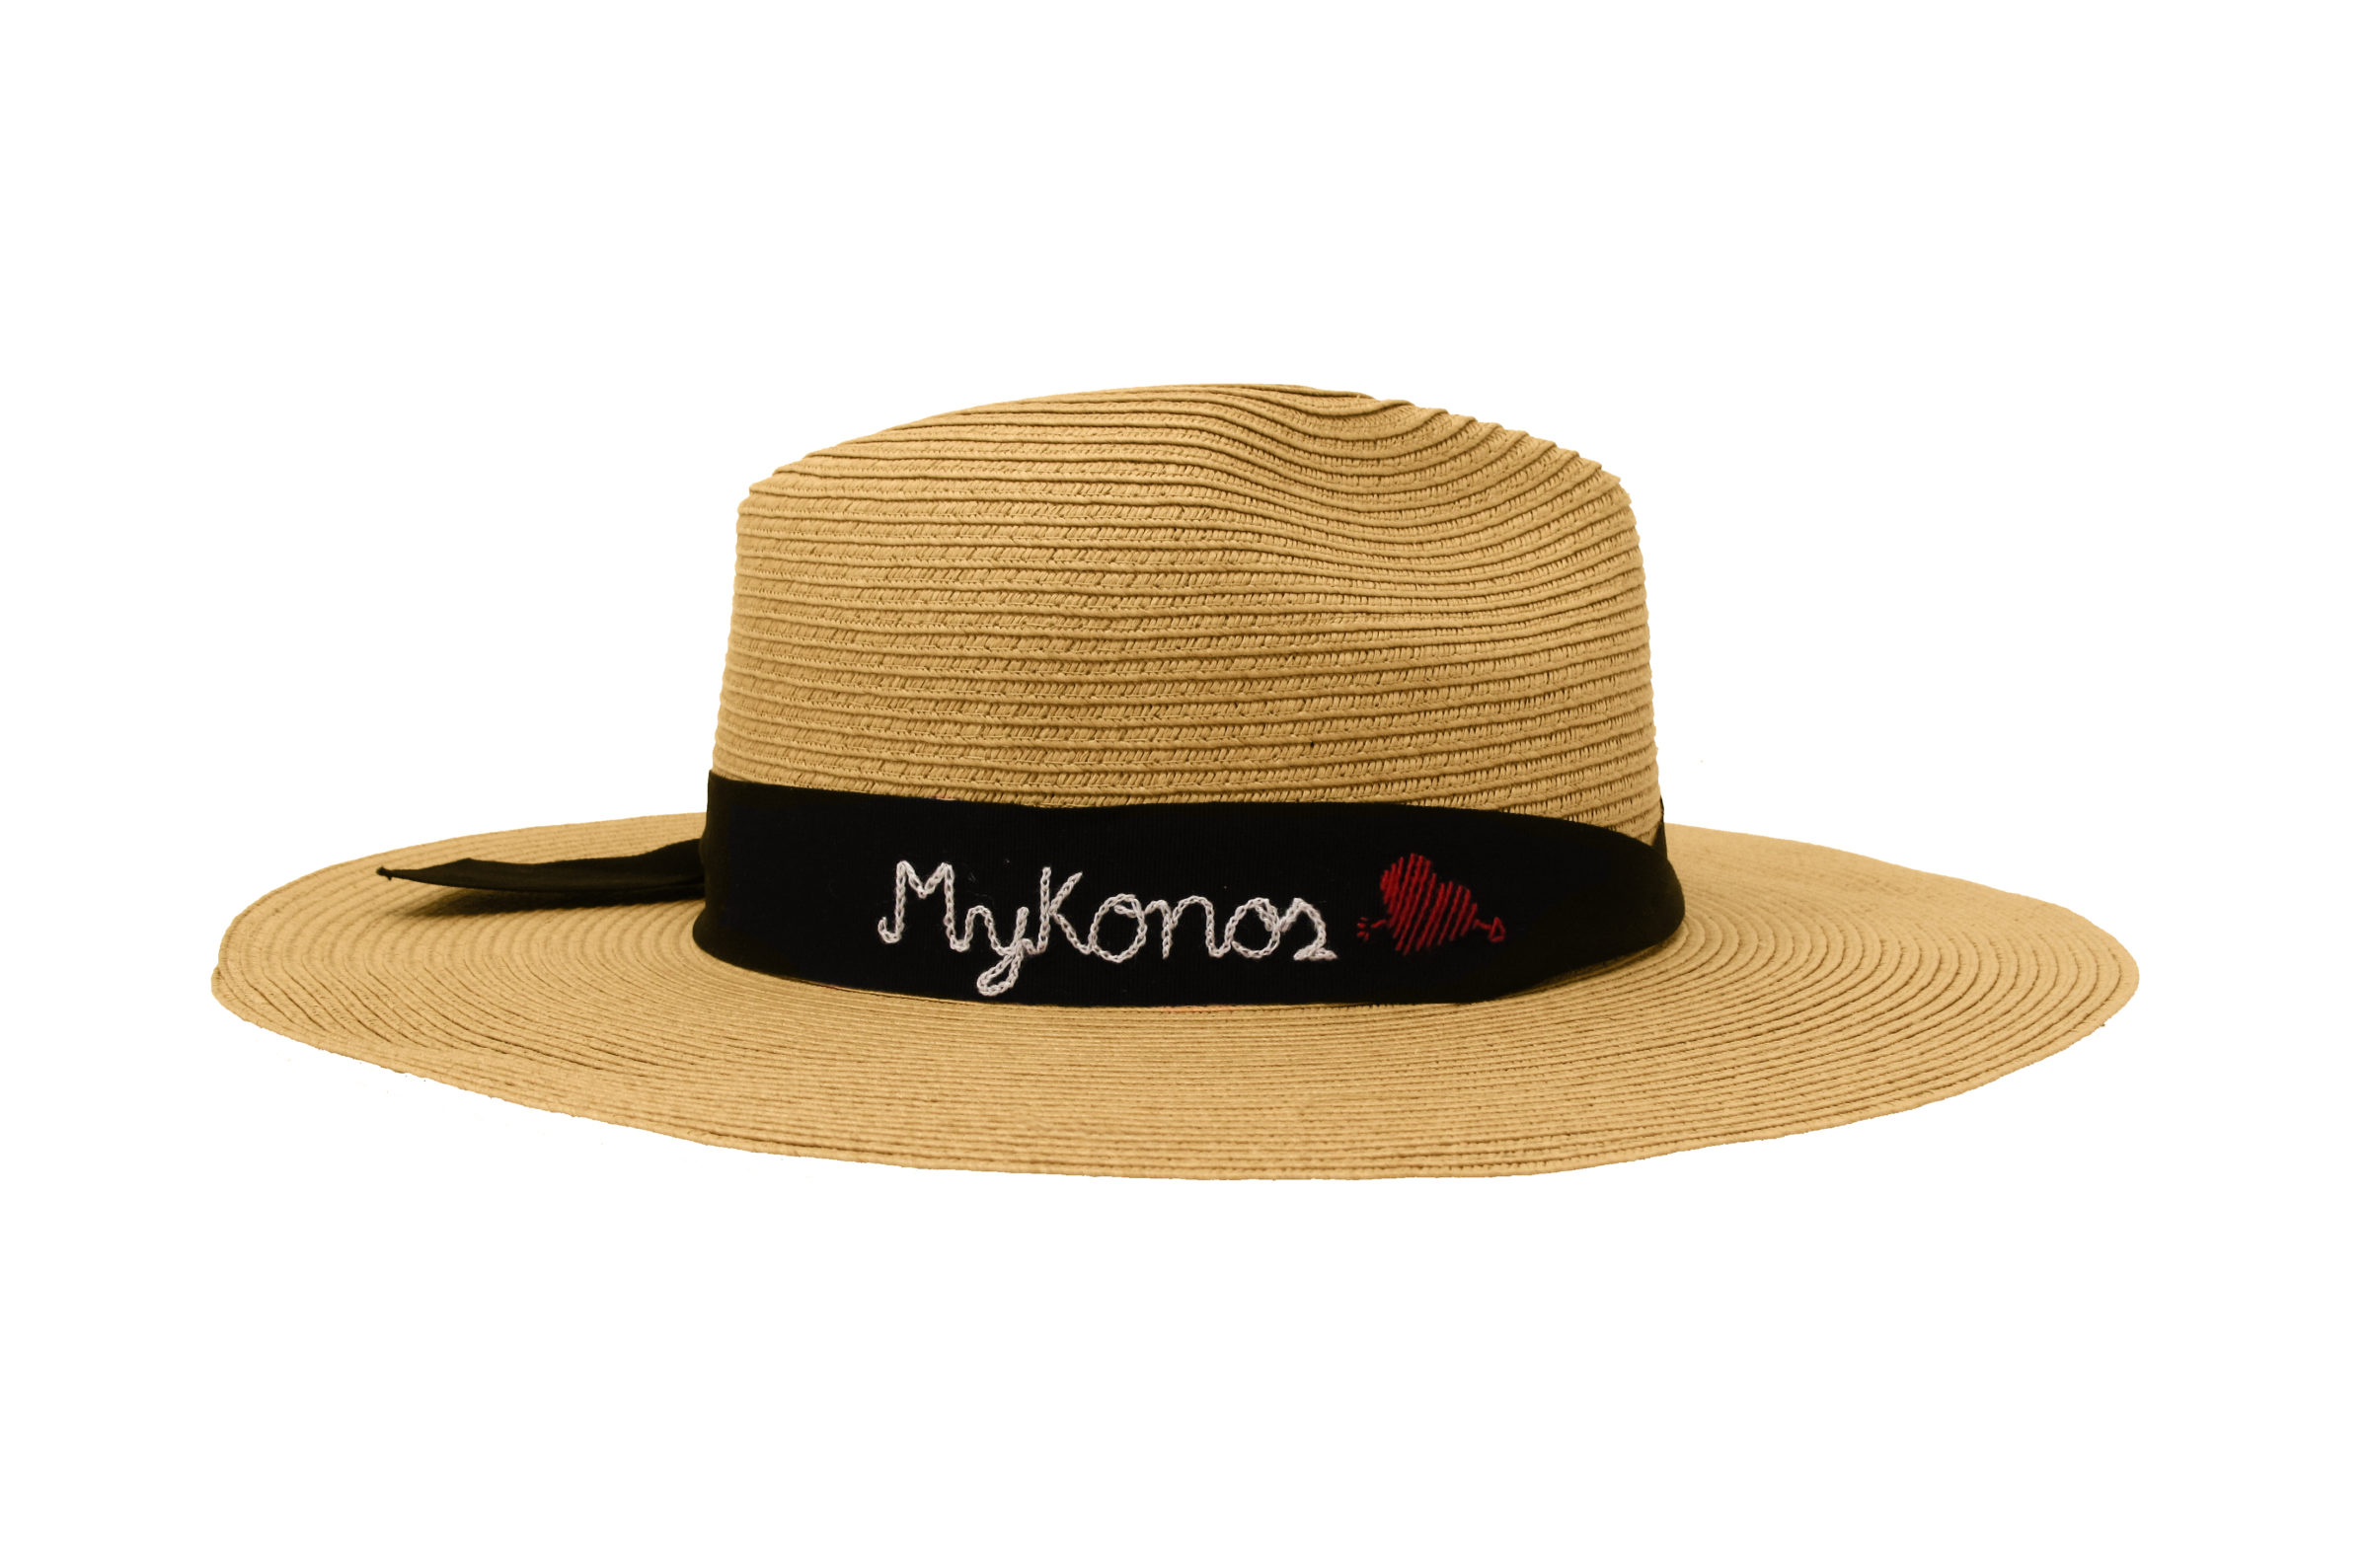 Beachy hat to wear on your honeymoon